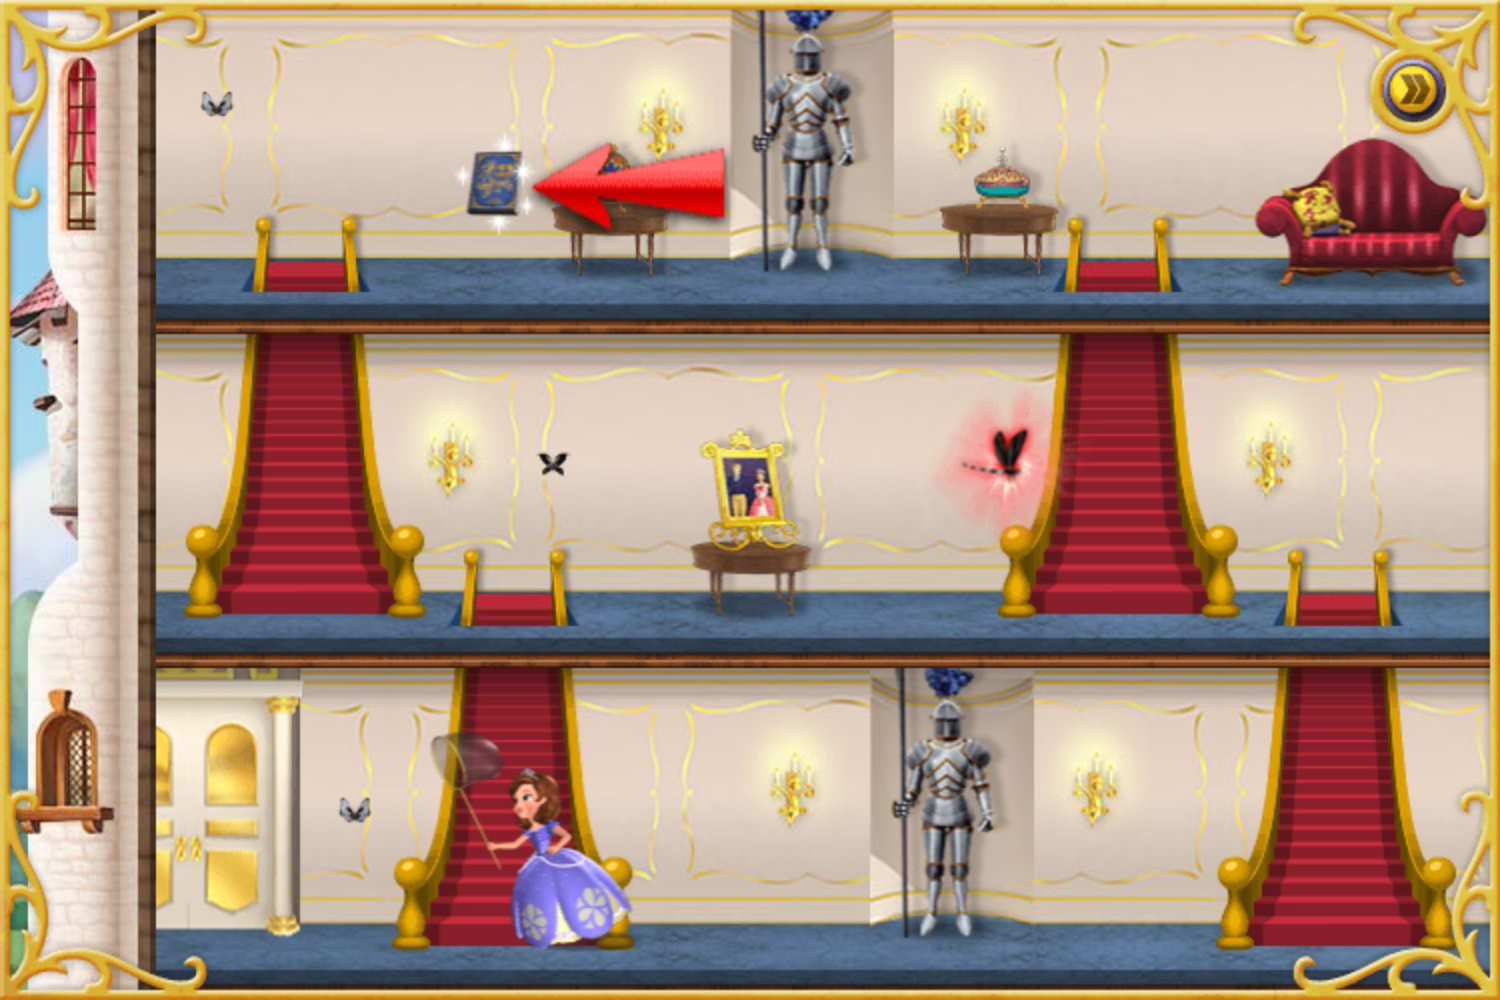 Sofia the First Curse of Princess Ivy Game How To Play Screenshot.